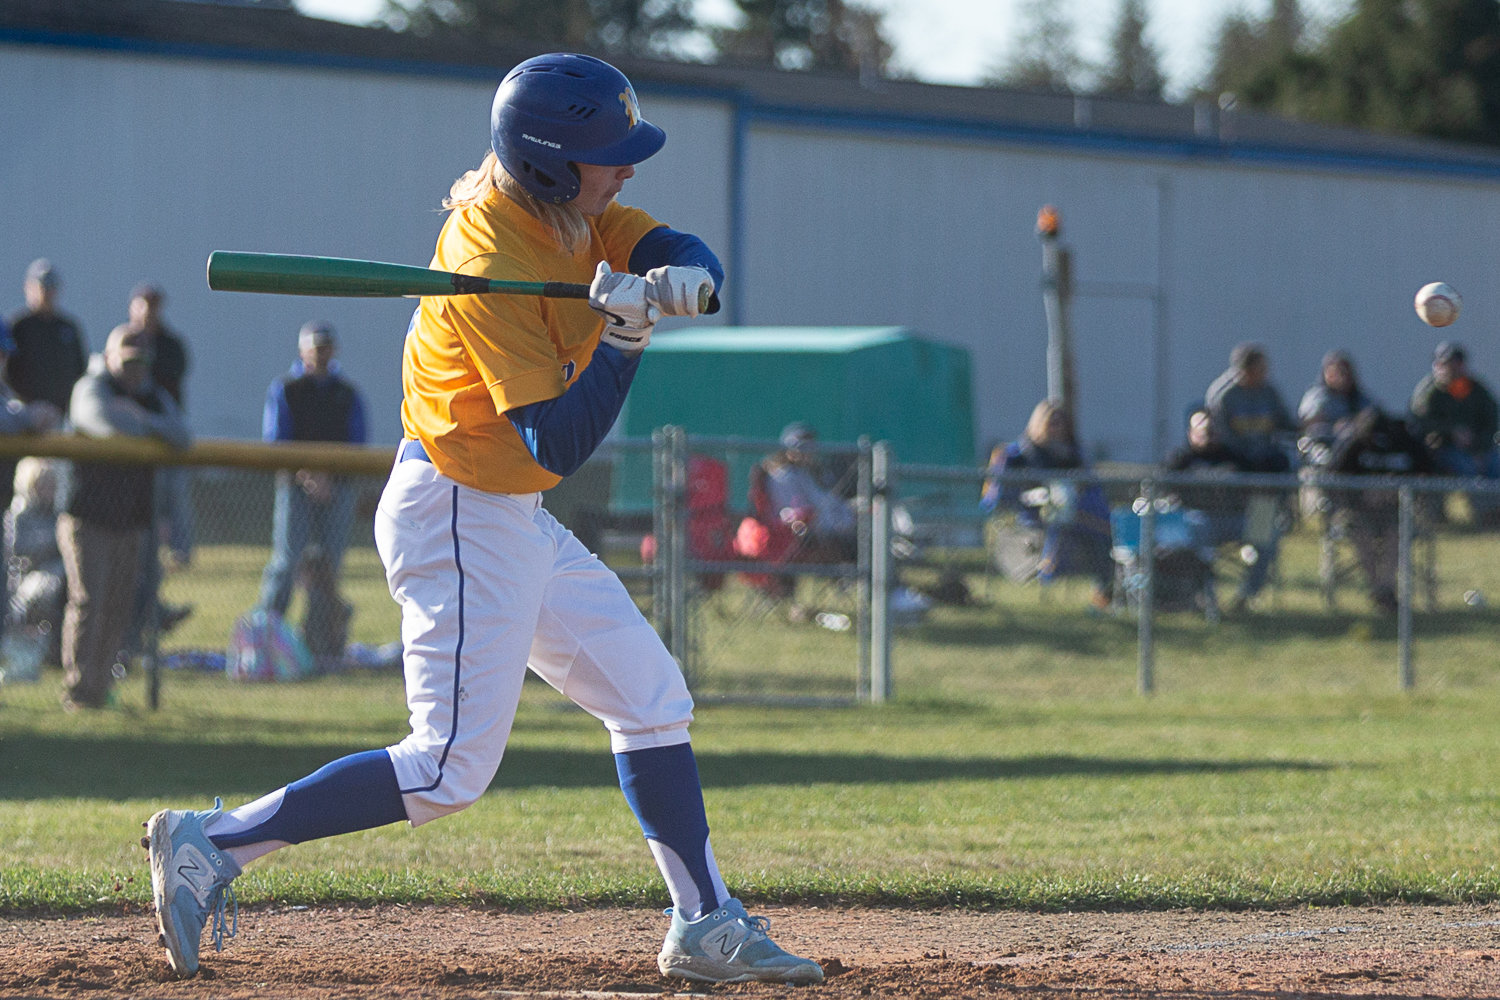 Rochester's Tate Quarnstrom takes a swing at a pitch against W.F. West at Heinz-Rotter Field March 21.